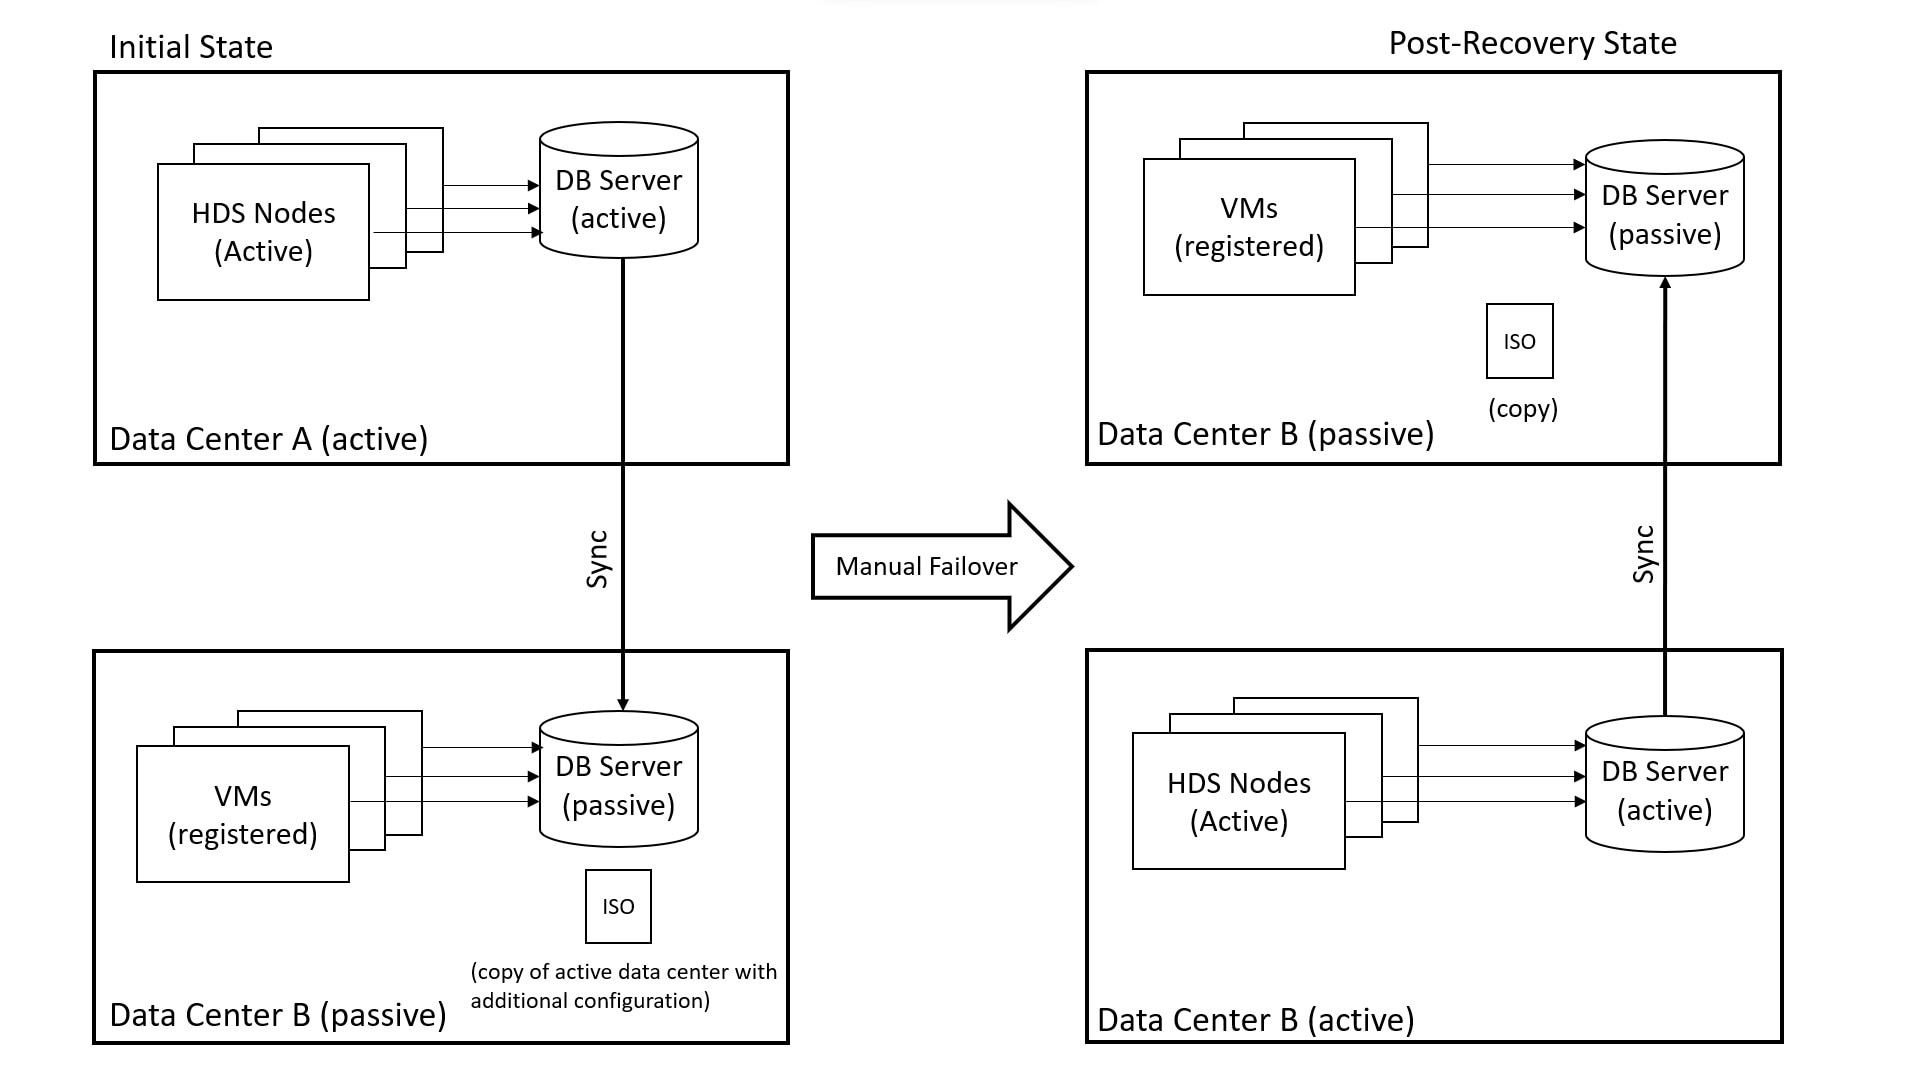 Before failover, Data Center A has active HDS nodes and the primary PostgreSQL or Microsoft SQL Server database, while B has unregistered VMs, a copy of the ISO file, and a standby database. After failover, Data Center B has active HDS nodes and the primary database, while A has unregistered VMs and a copy of the ISO file, and the database is in standby mode.